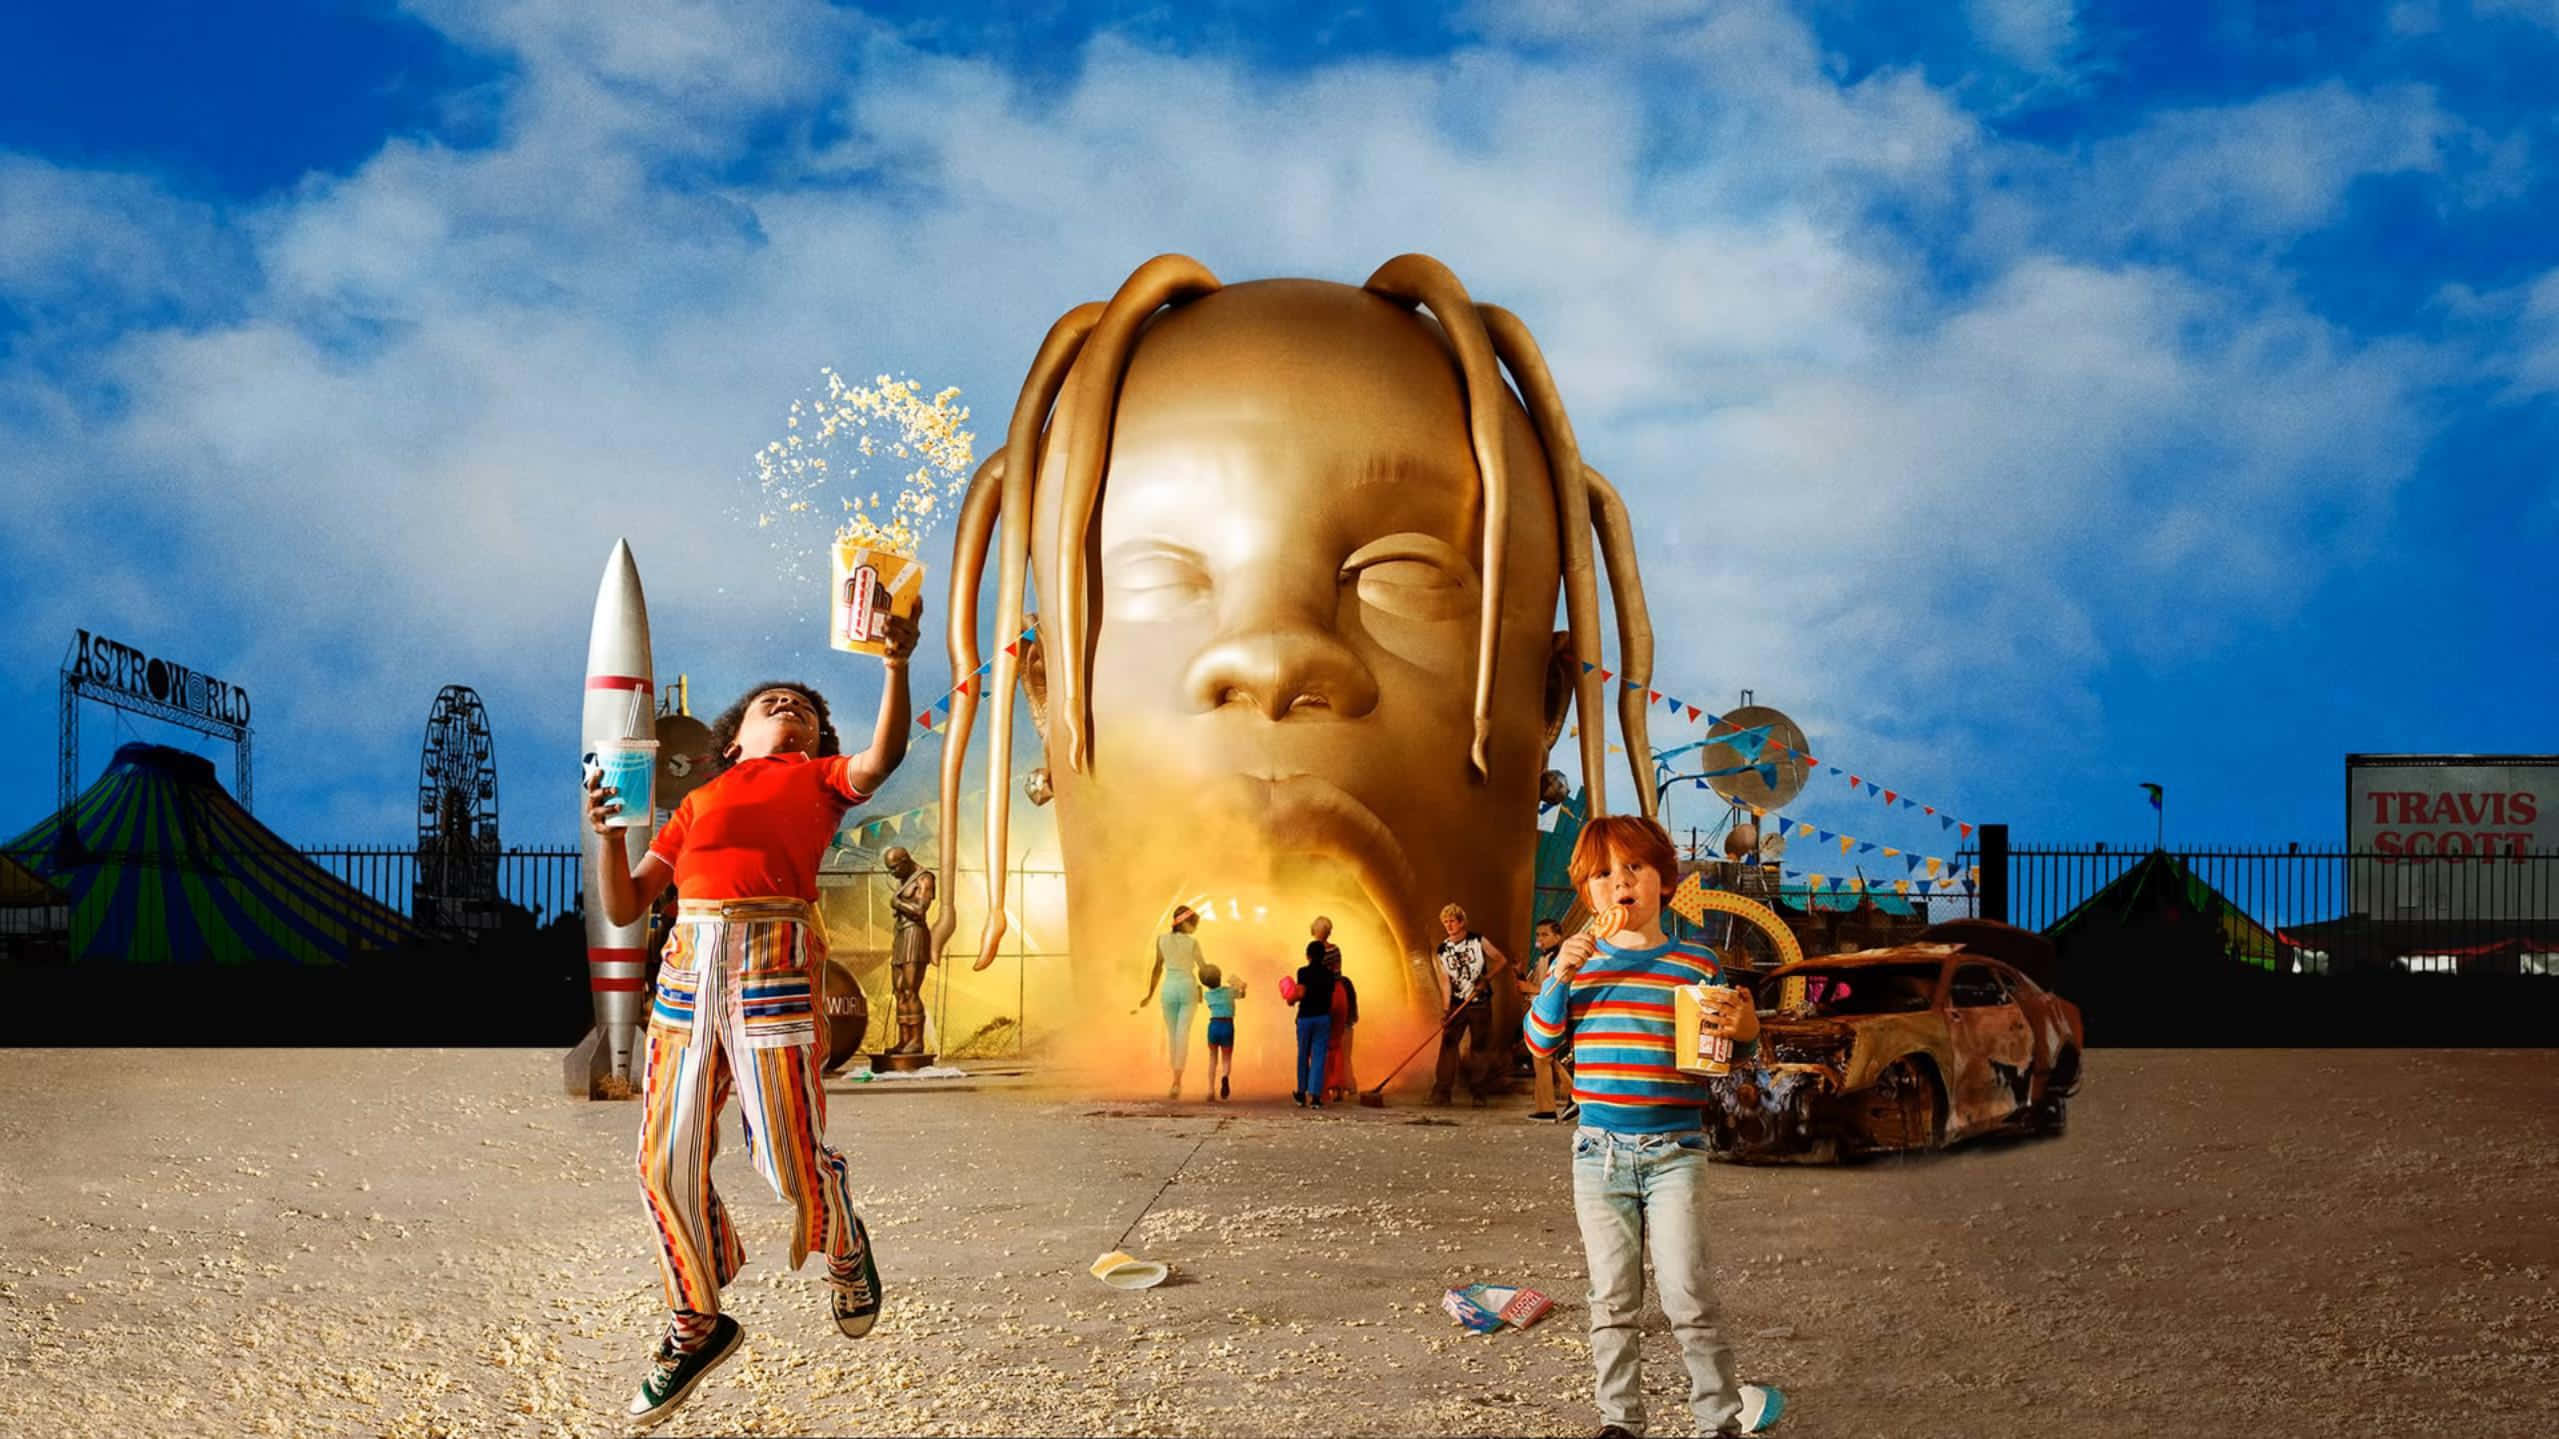 Welcome to Astroworld, the most thrilling amusement park!